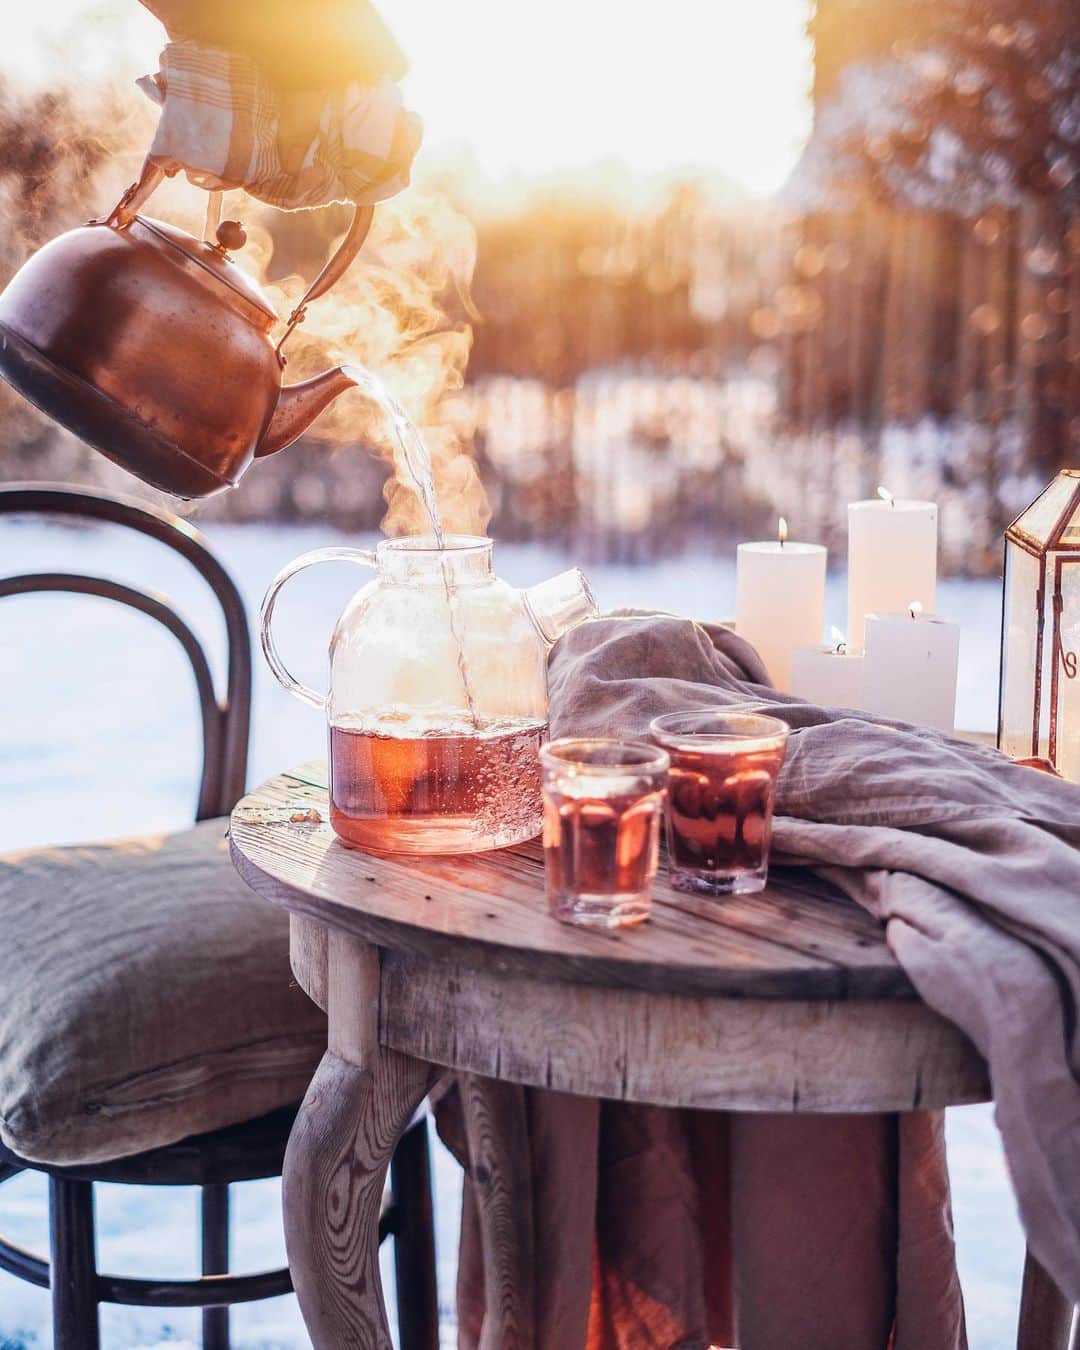 Our Food Storiesのインスタグラム：「Another photo from this lovely winter scene in our garden ❄️✨ #ourfoodstories  ____ #menuteapot #teapot #teapots #fellowmag #verilymoment #simplejoys #foodphotographer #foodstylist #germanfoodblogger #wintertime #magicalmoments #chasinglight」